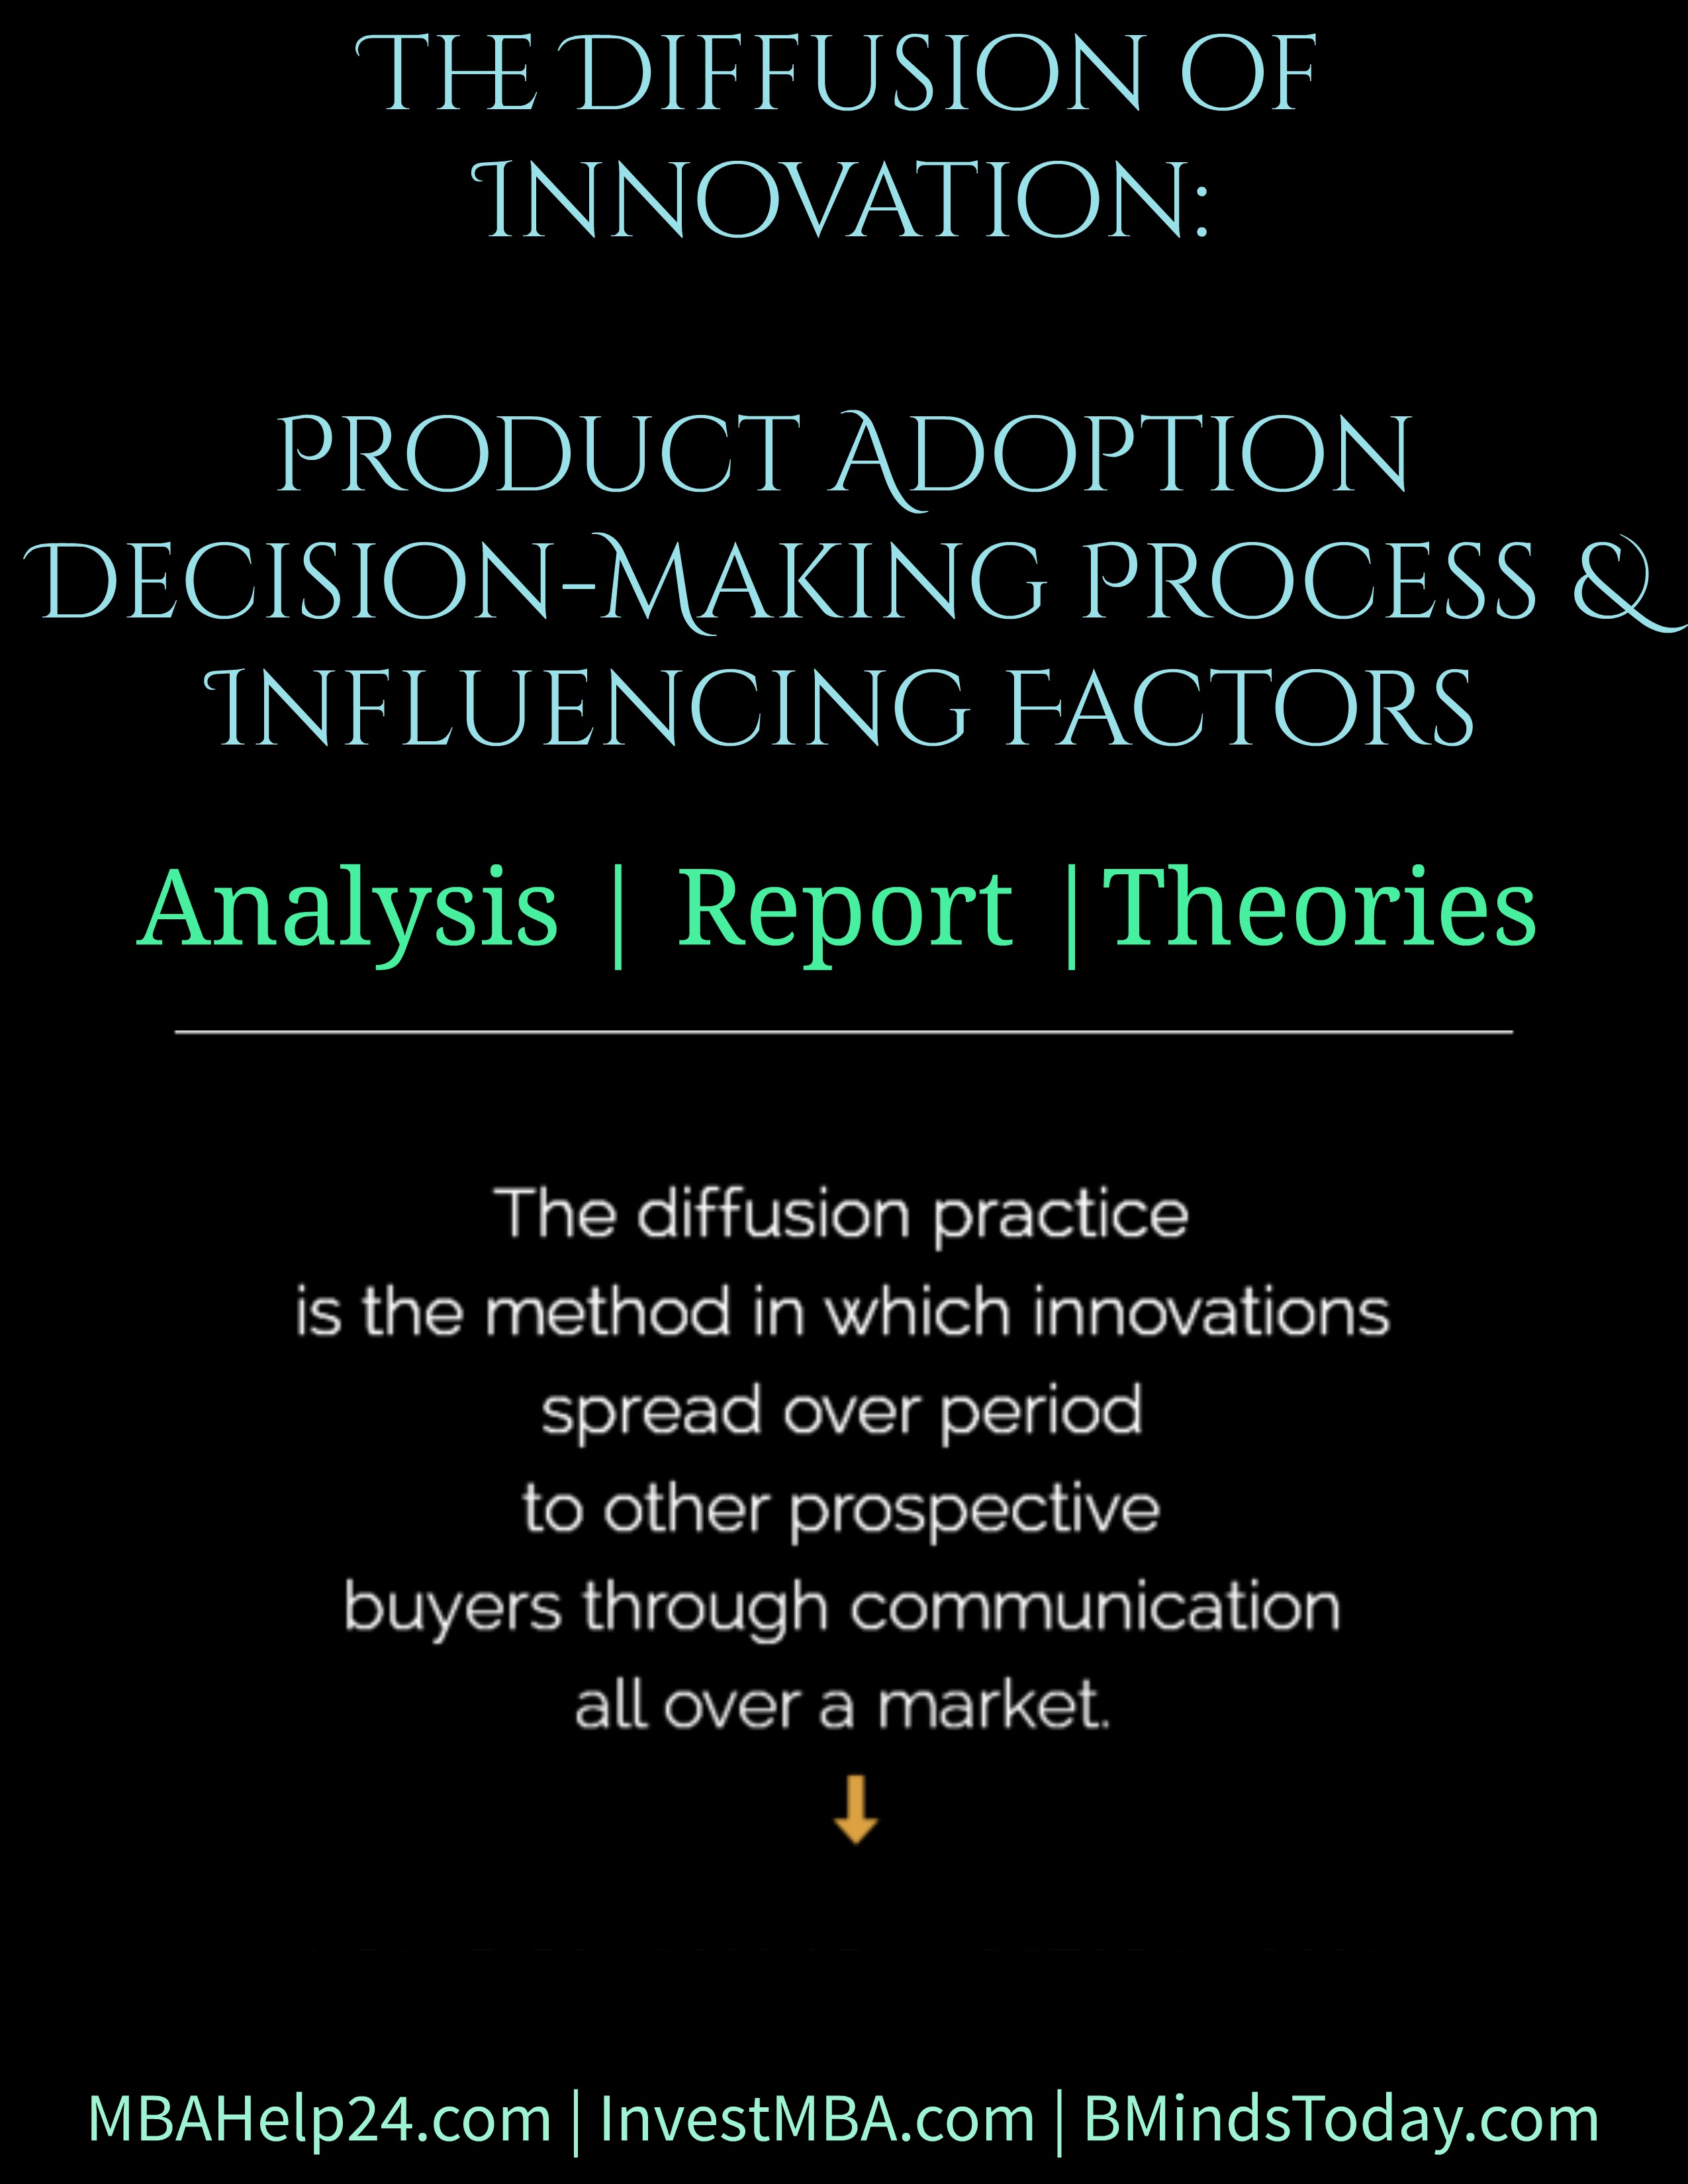 The Diffusion of Innovation: Product Adoption Decision-Making Process & Influencing Factors diffusion The Diffusion of Innovation | Product Adoption | Decision-Making &#038; Influencing Factors The Diffusion of Innovation Product Adoption Decision Making Process and Influencing Factors